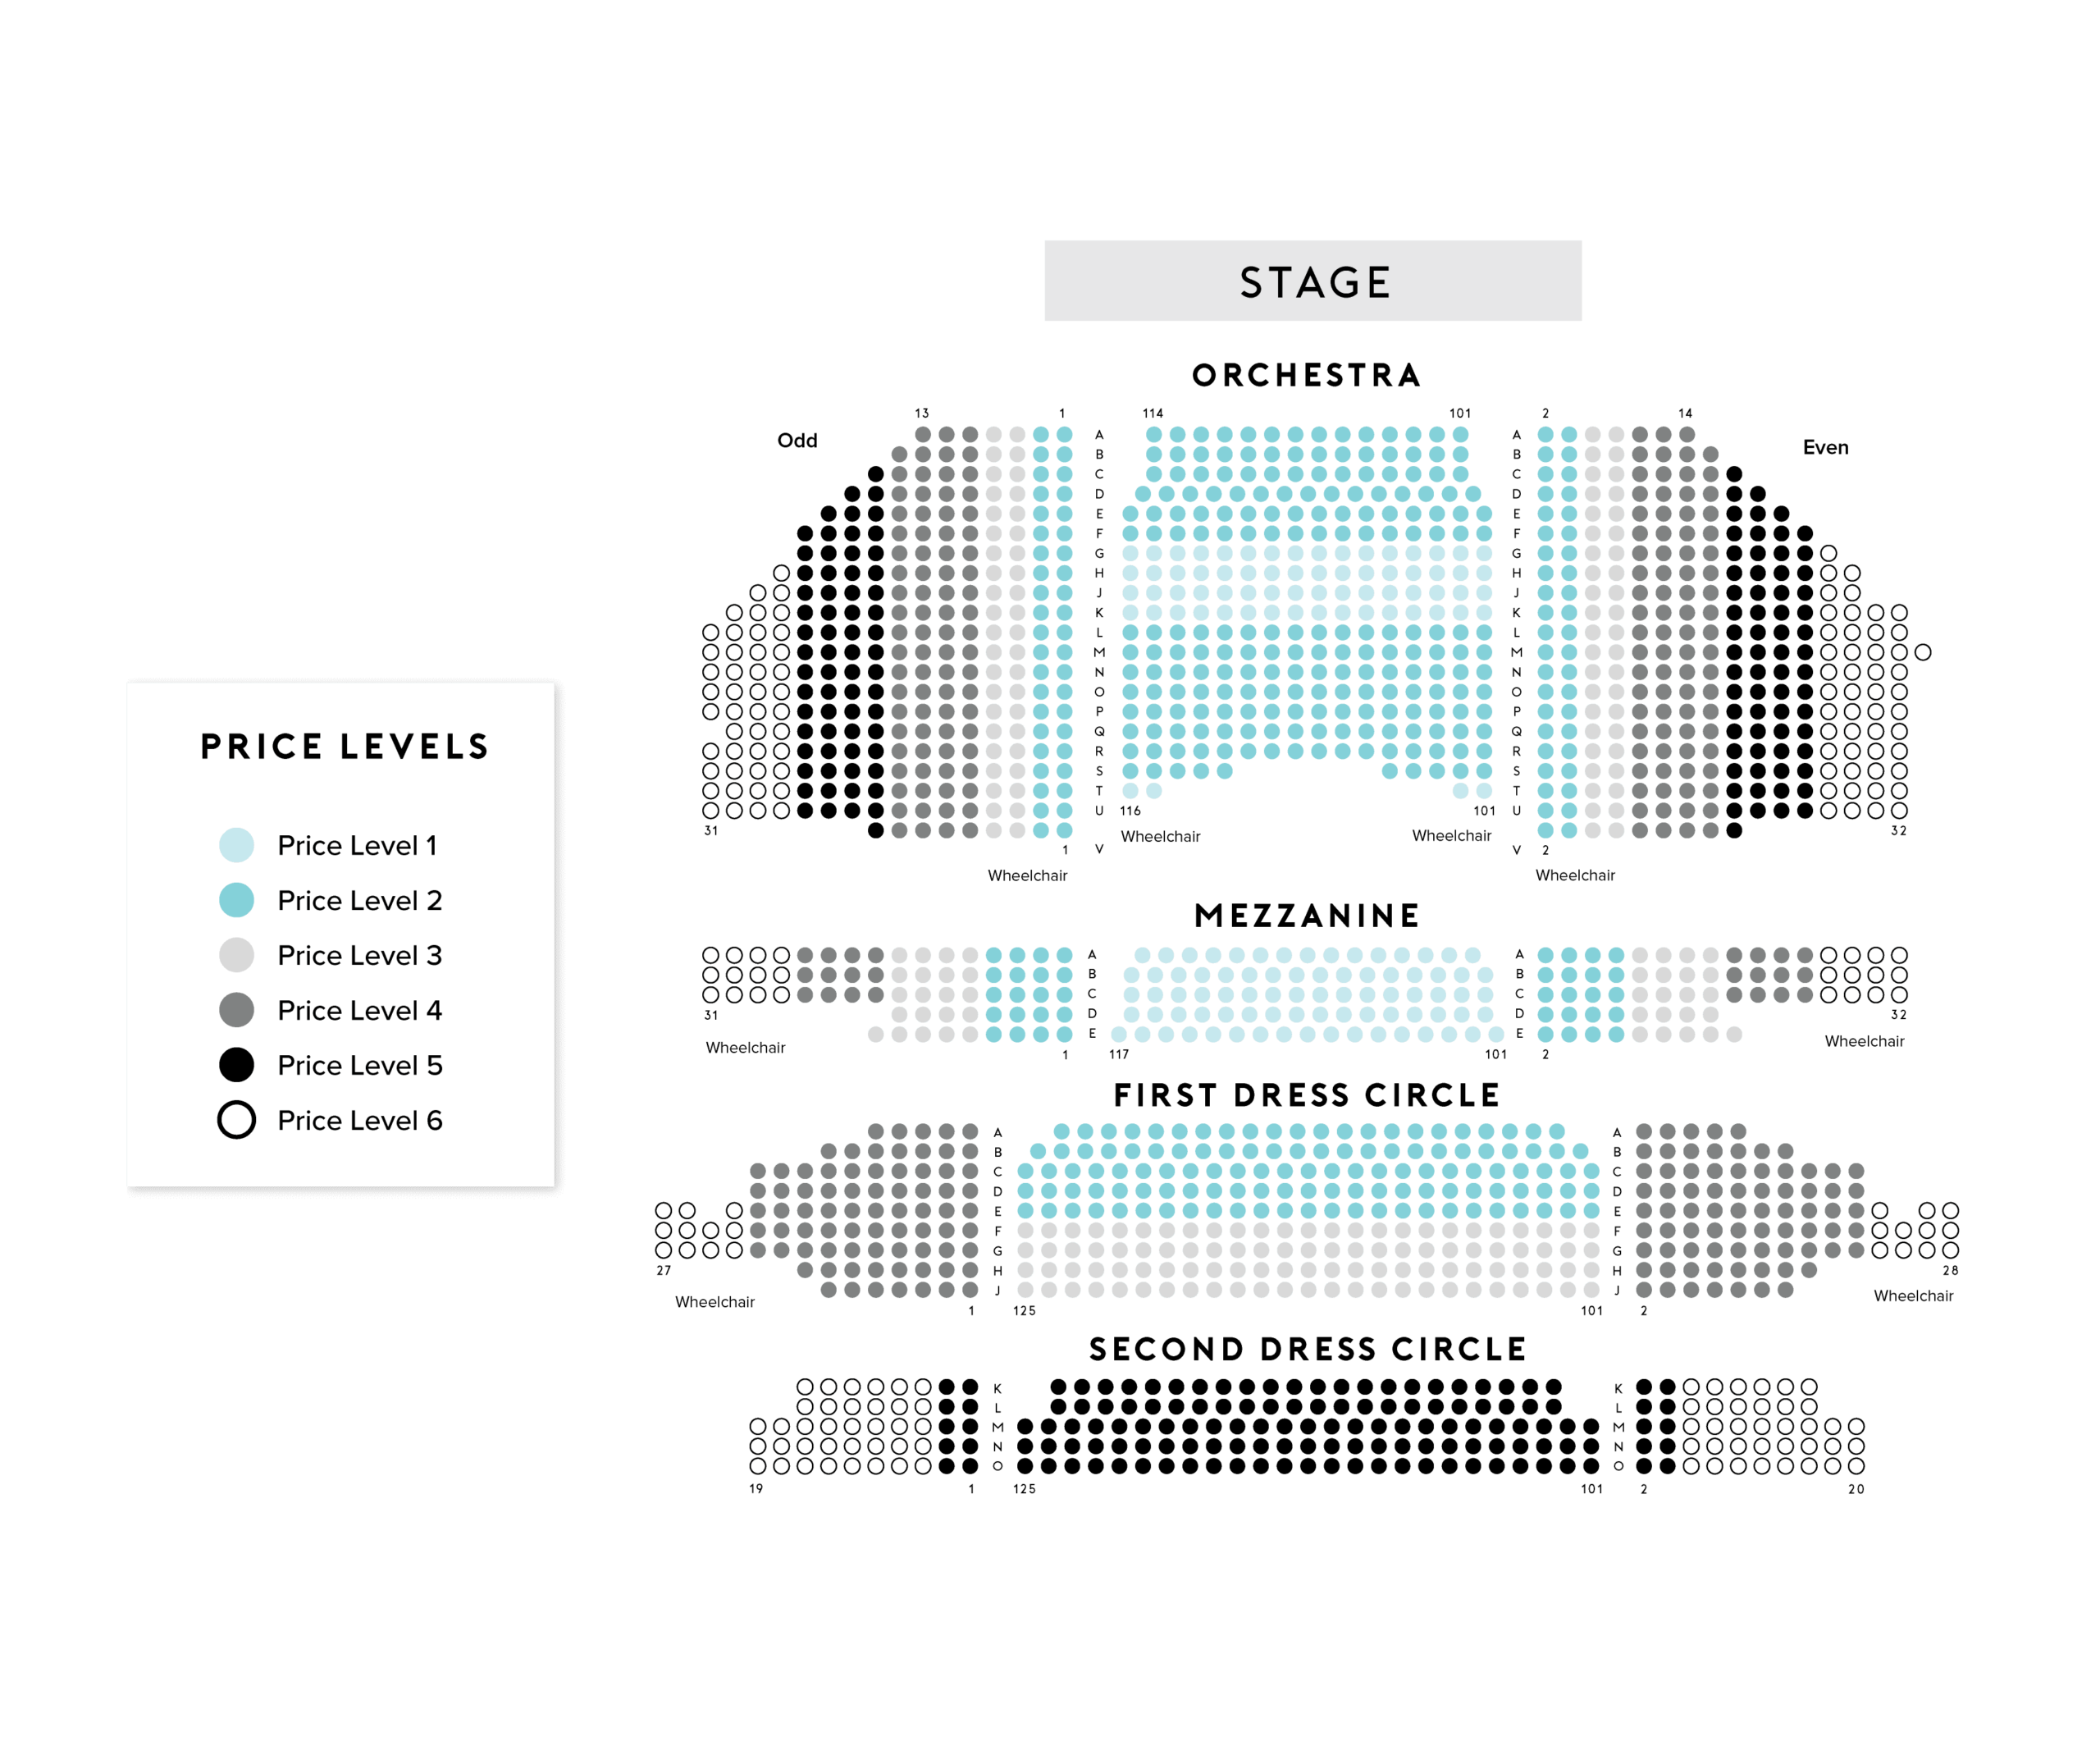 Dominion Energy Center Seating Chart